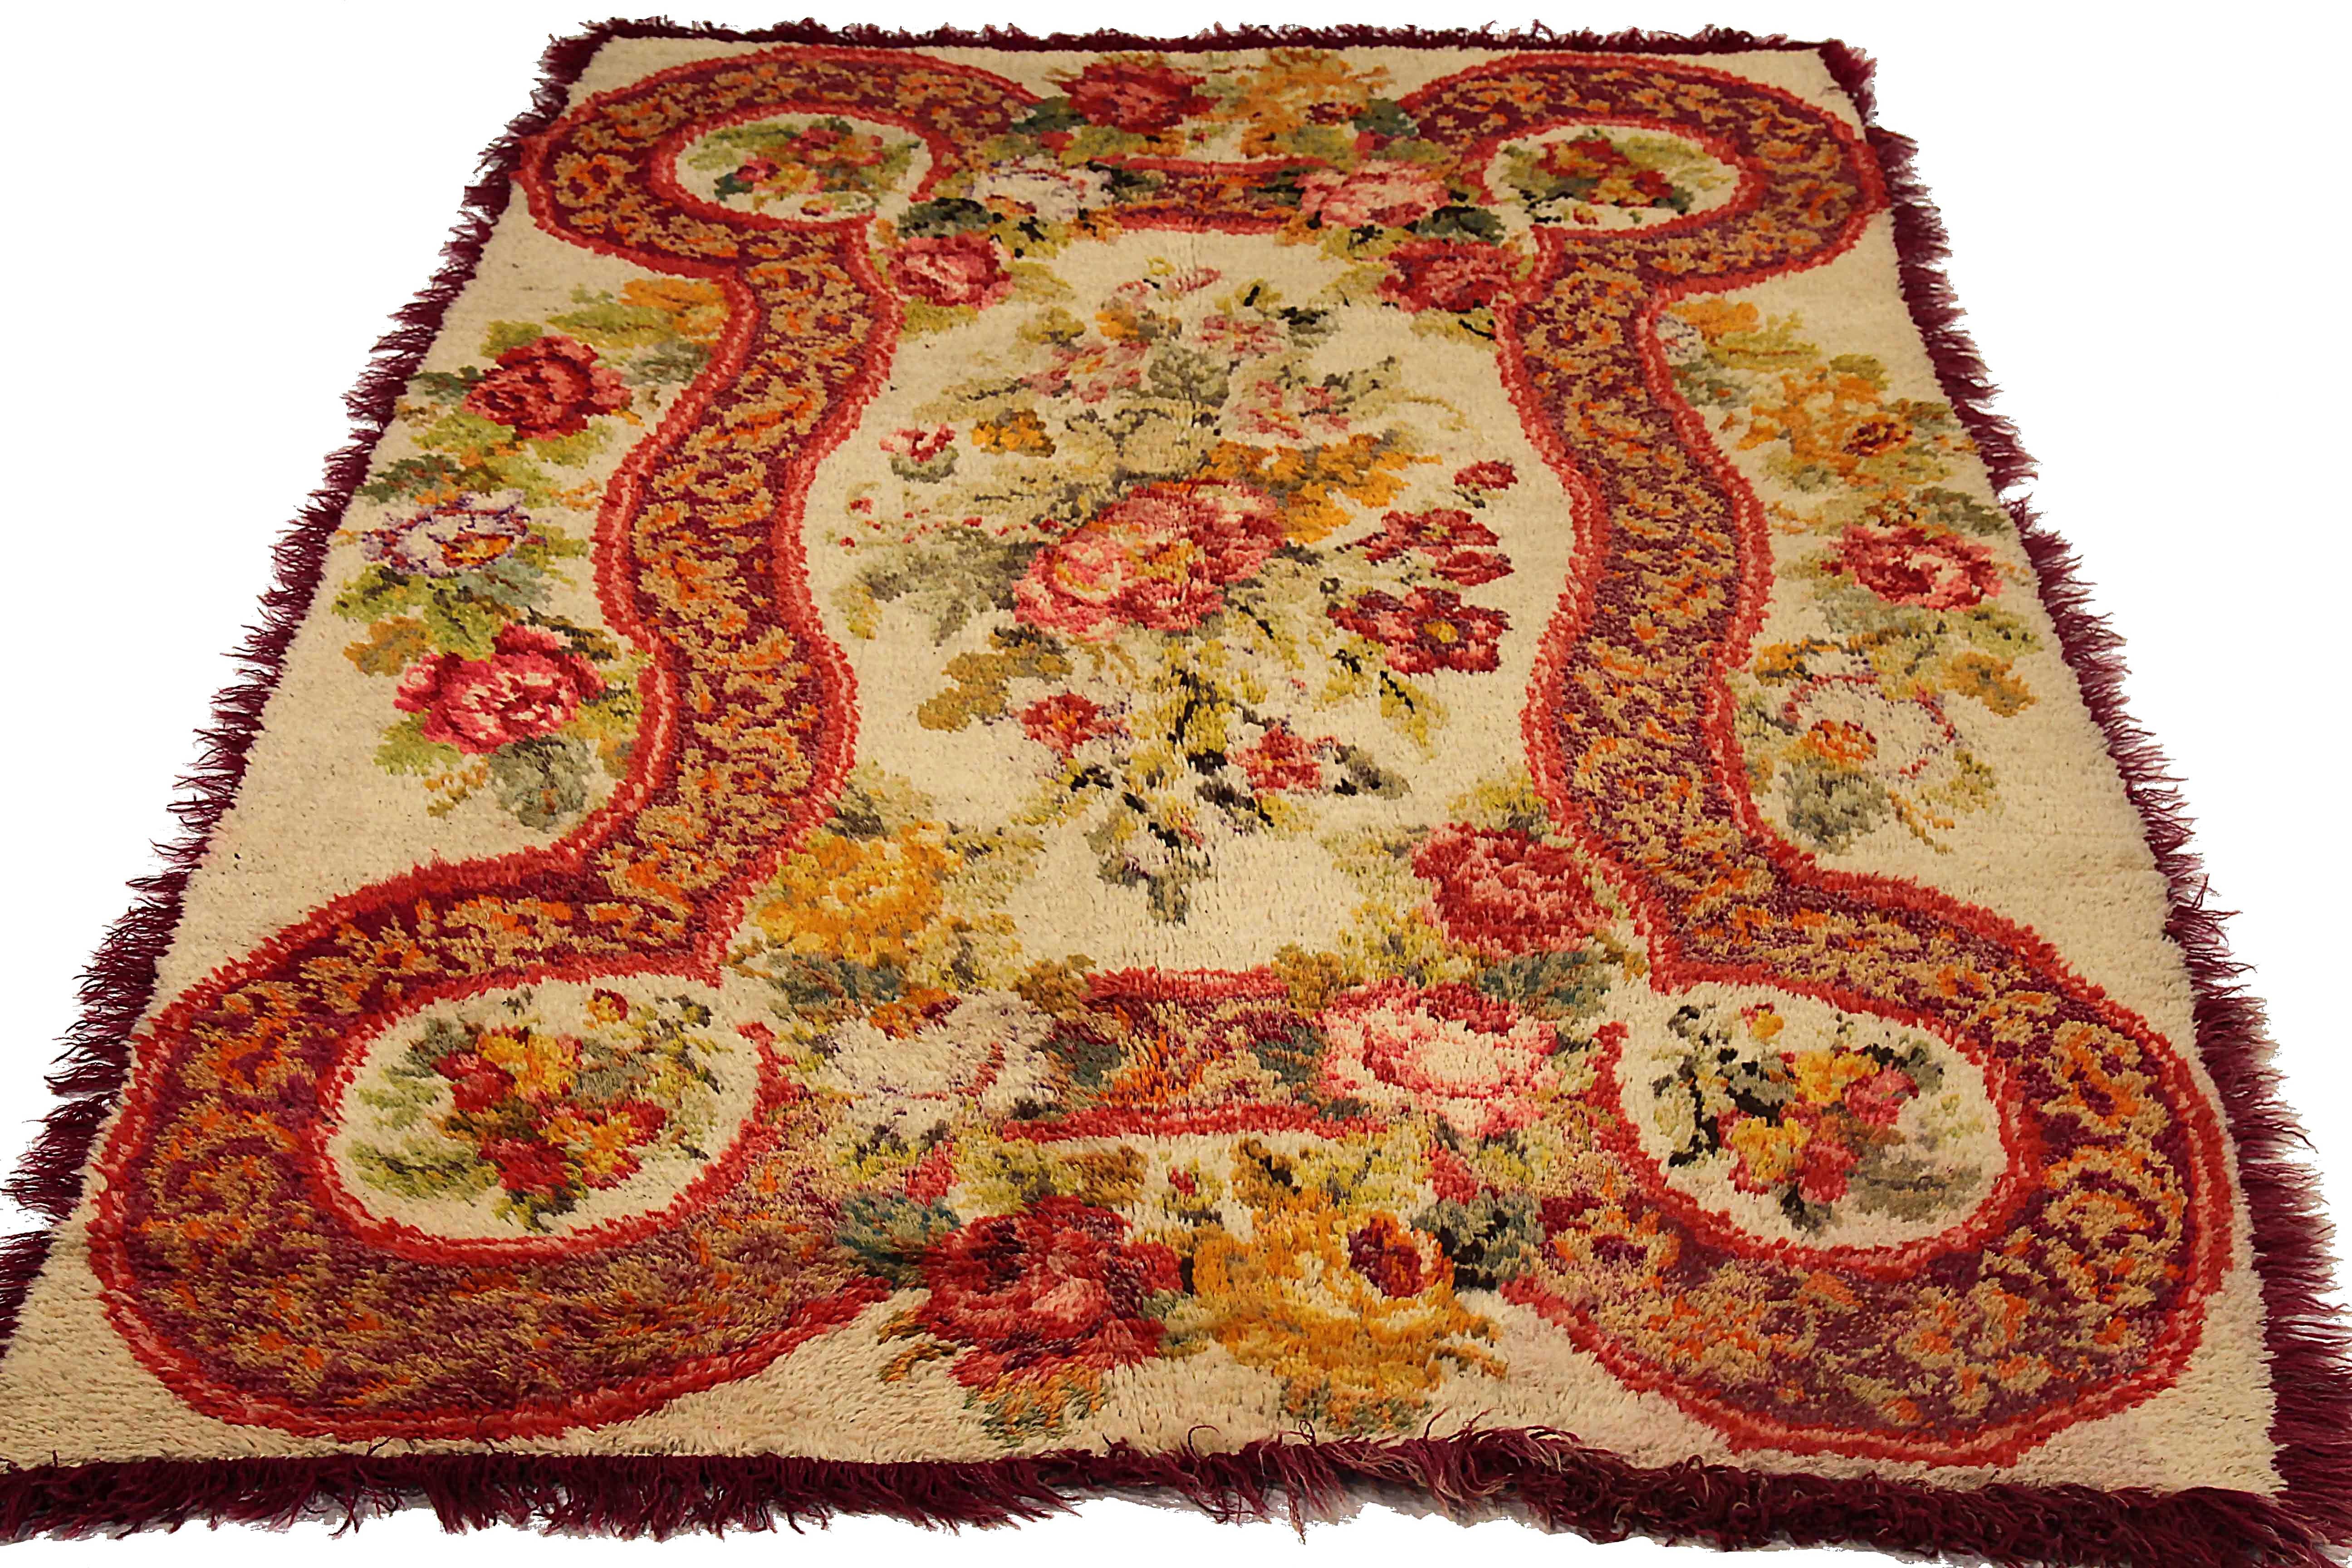 Antique Russian area rug handwoven from the finest sheep’s wool. It’s colored with all-natural vegetable dyes that are safe for humans and pets. It’s a traditional Karebagh design handwoven by expert artisans. It’s a lovely area rug that can be